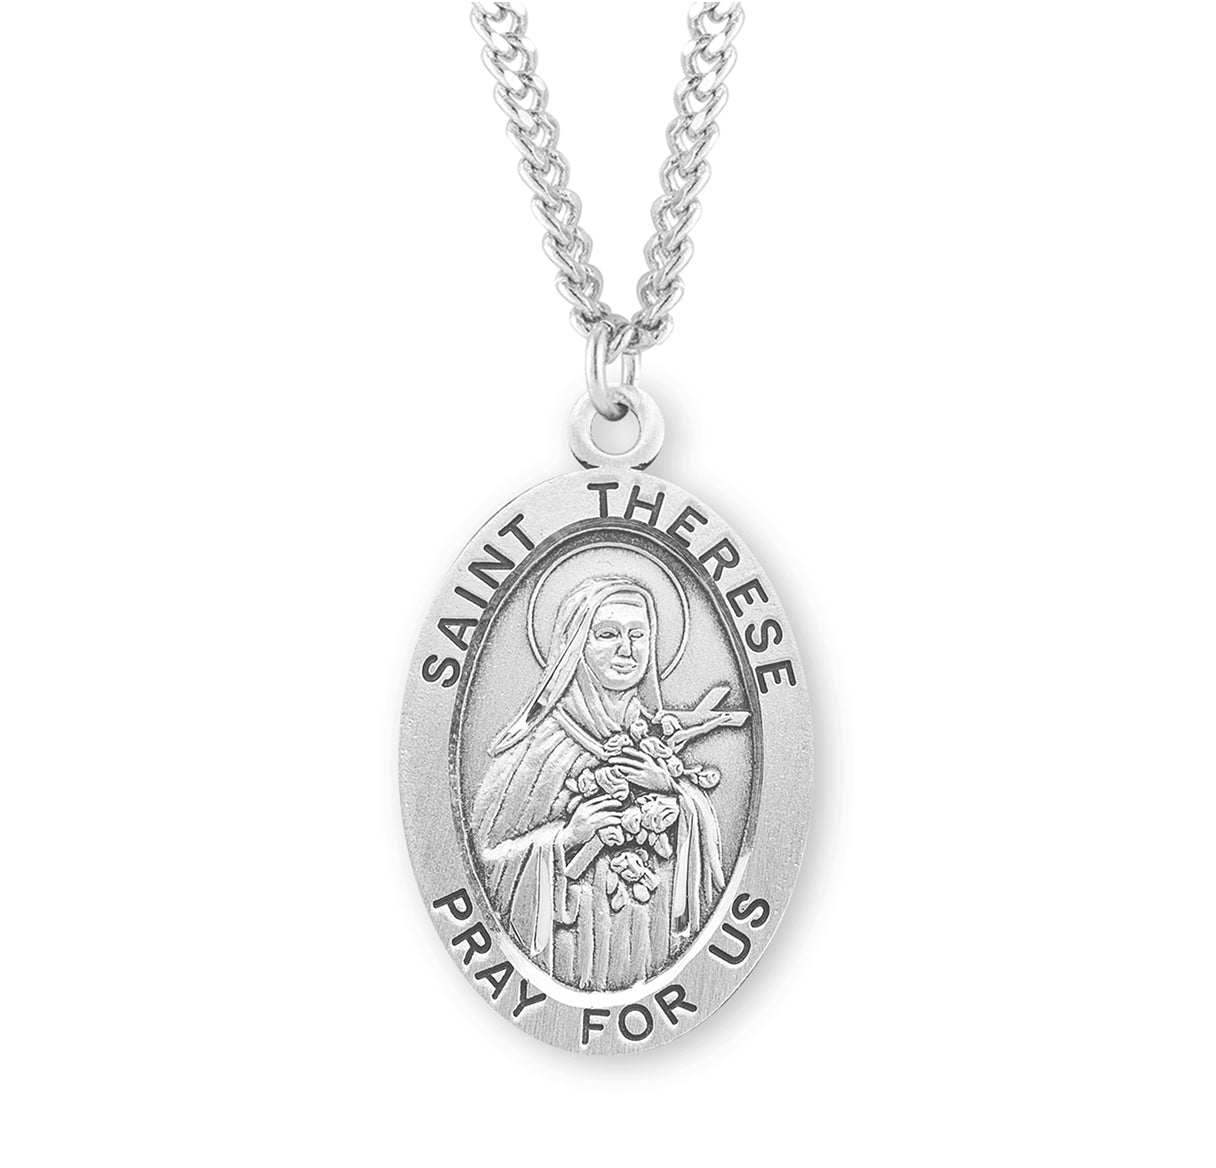 Patron Saint Therese of Lisieux Oval Sterling Silver Medal